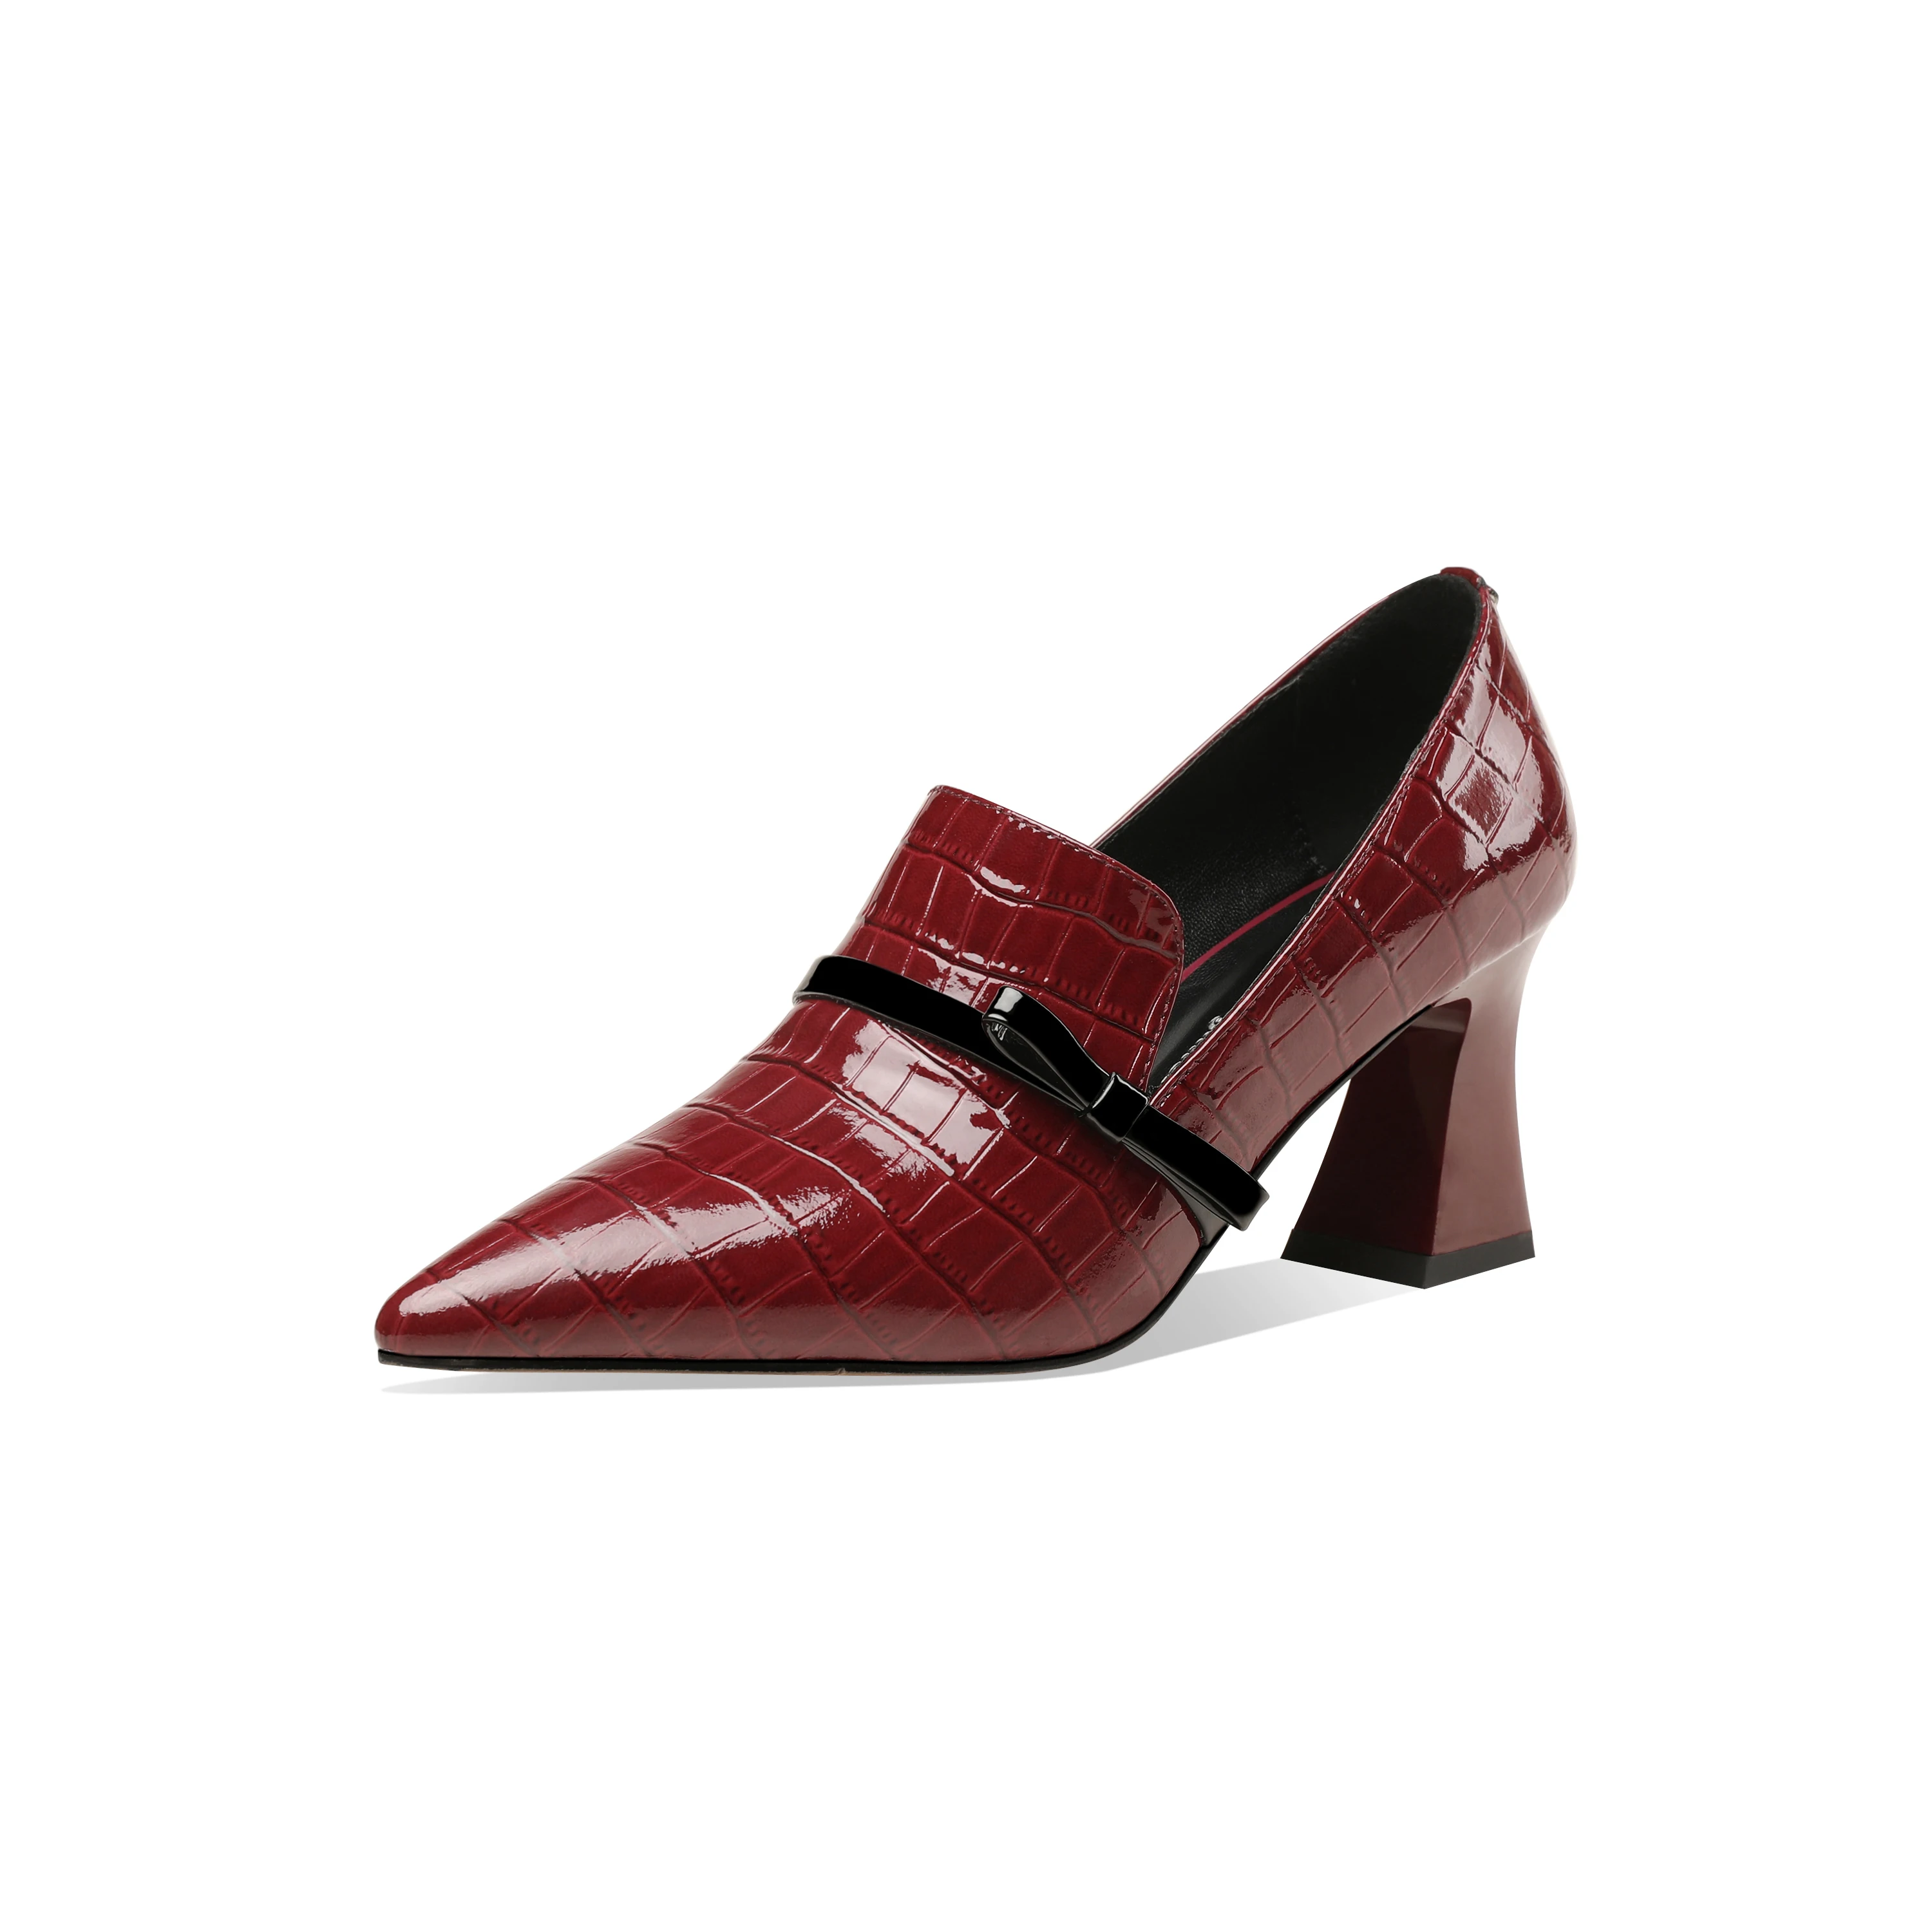 

Mstyle Bamboo Like Patent Leather Cute Bowtie Loafer Pumps High Spool Heel Pointed Toe Black Wine Red Handmade Lady Heeled Shoes